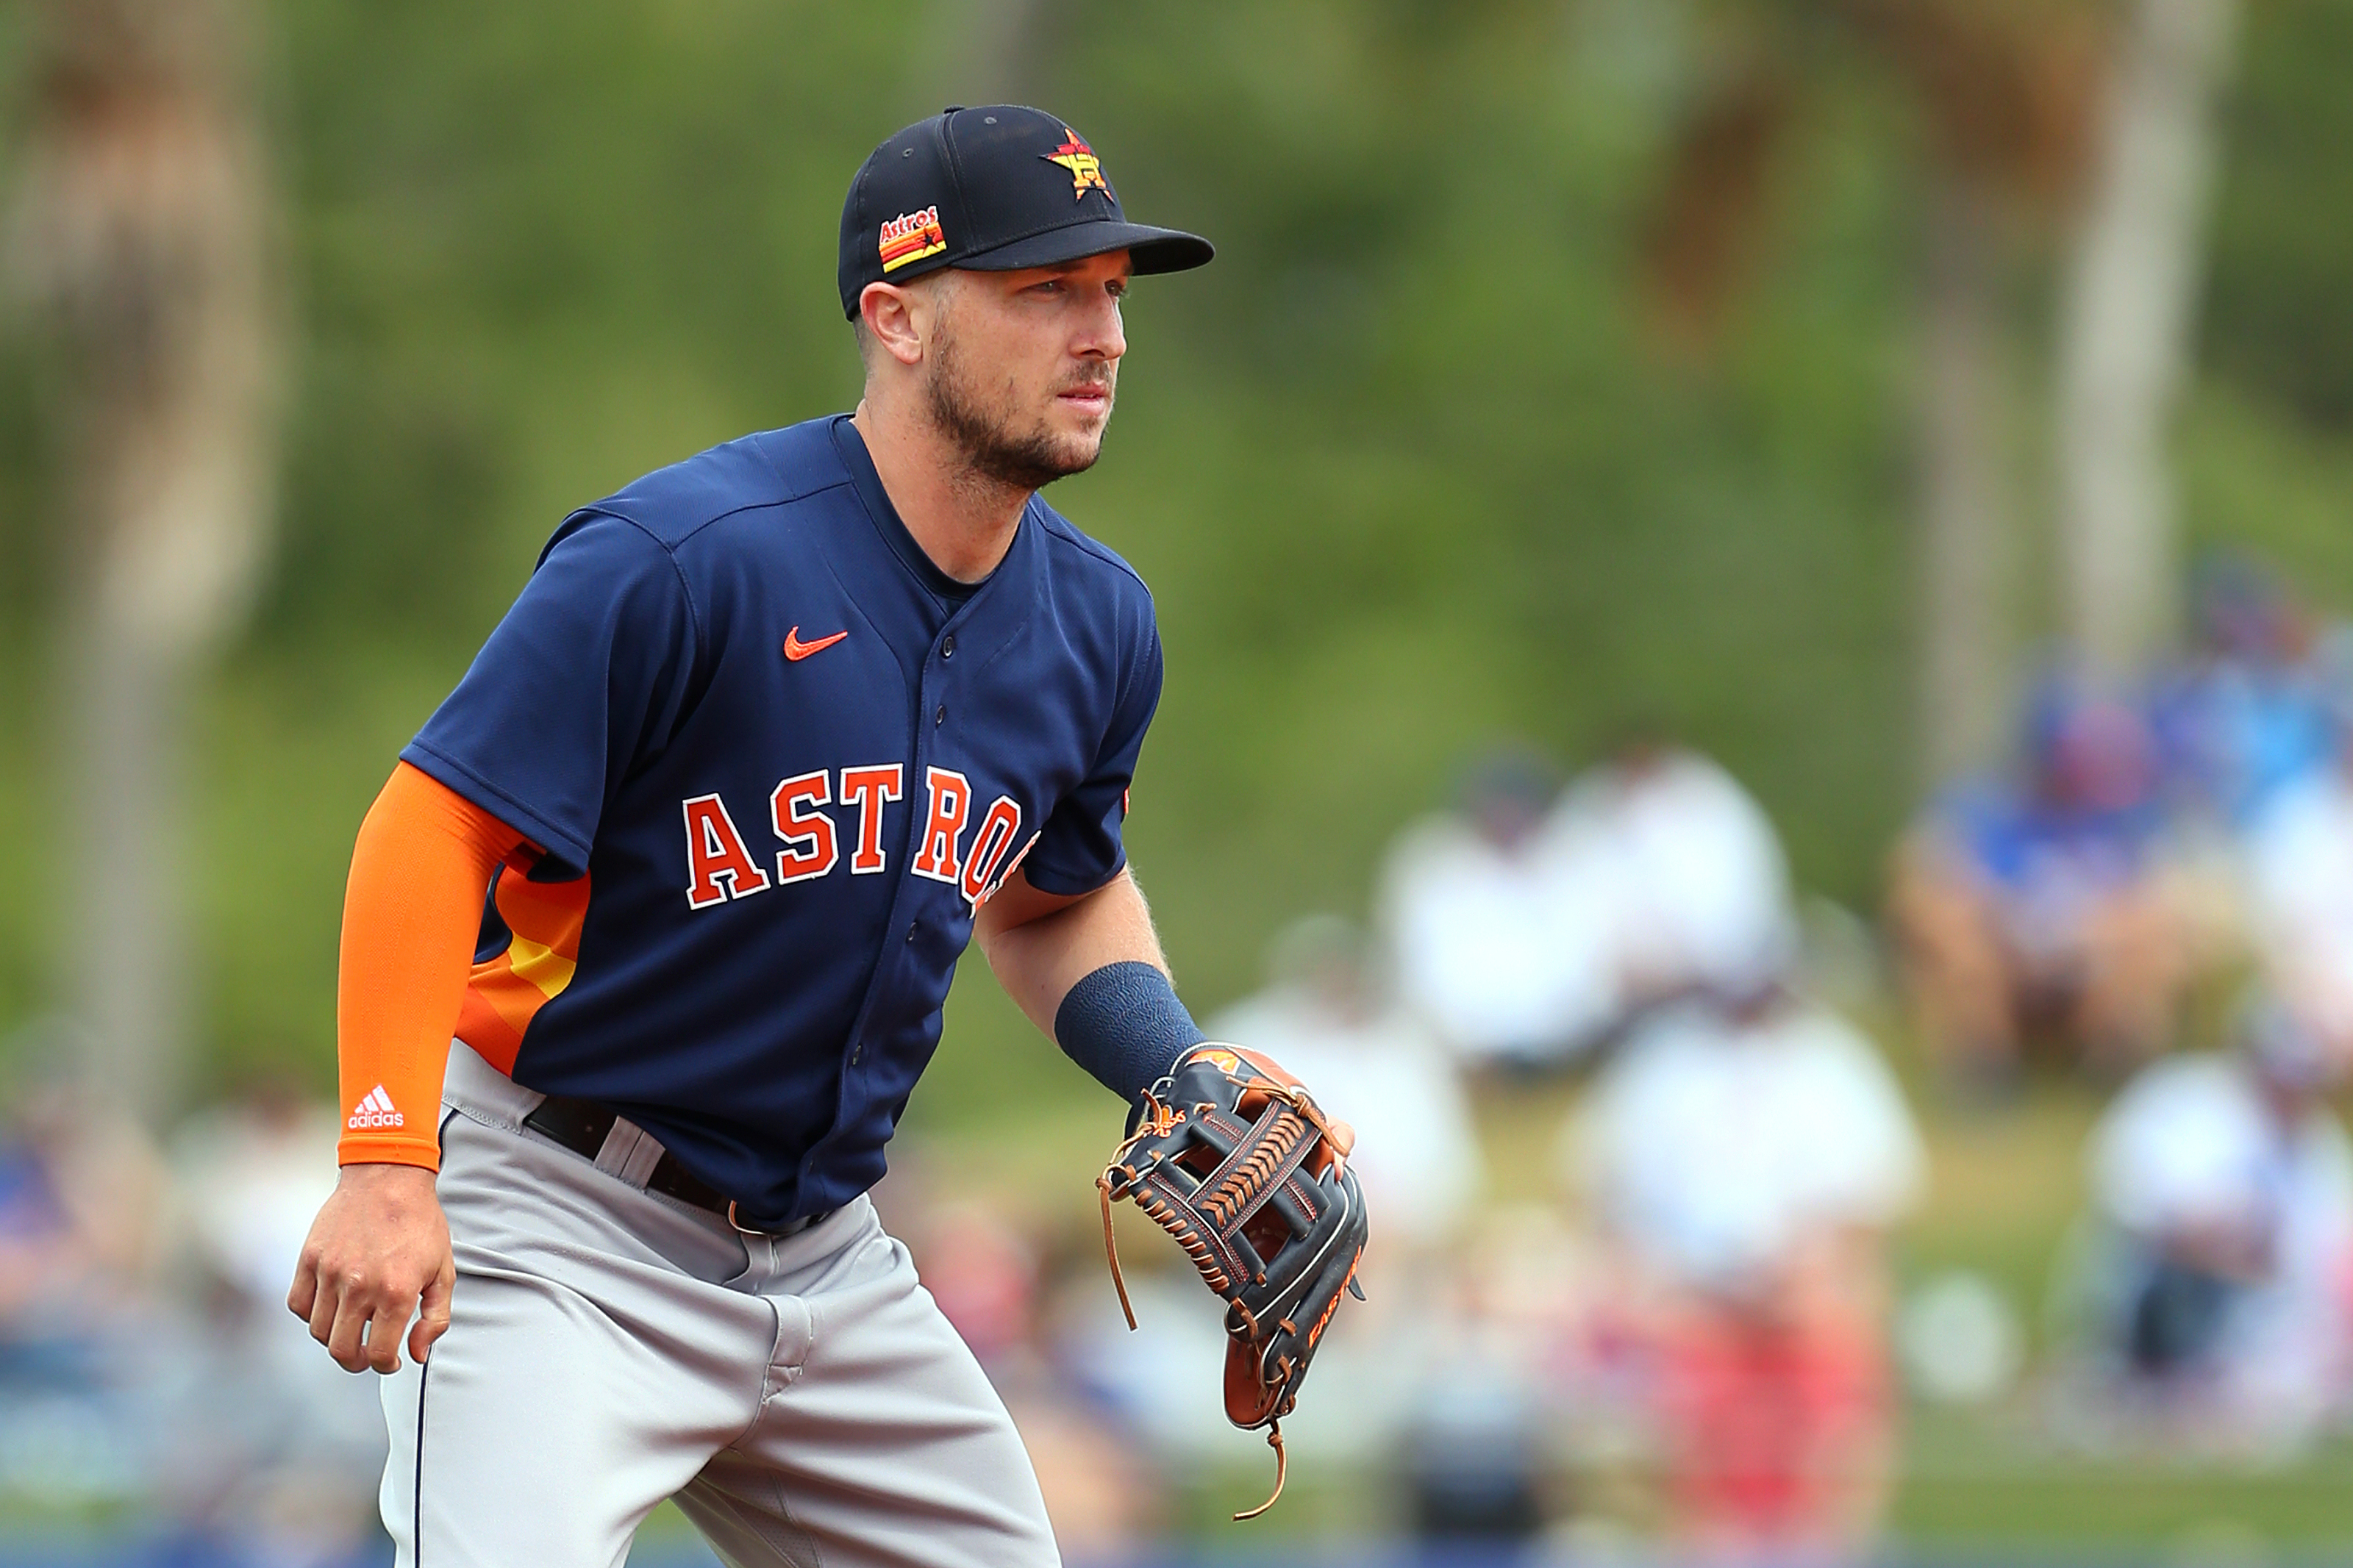 Alex Bregman may have some beef with LeBron James